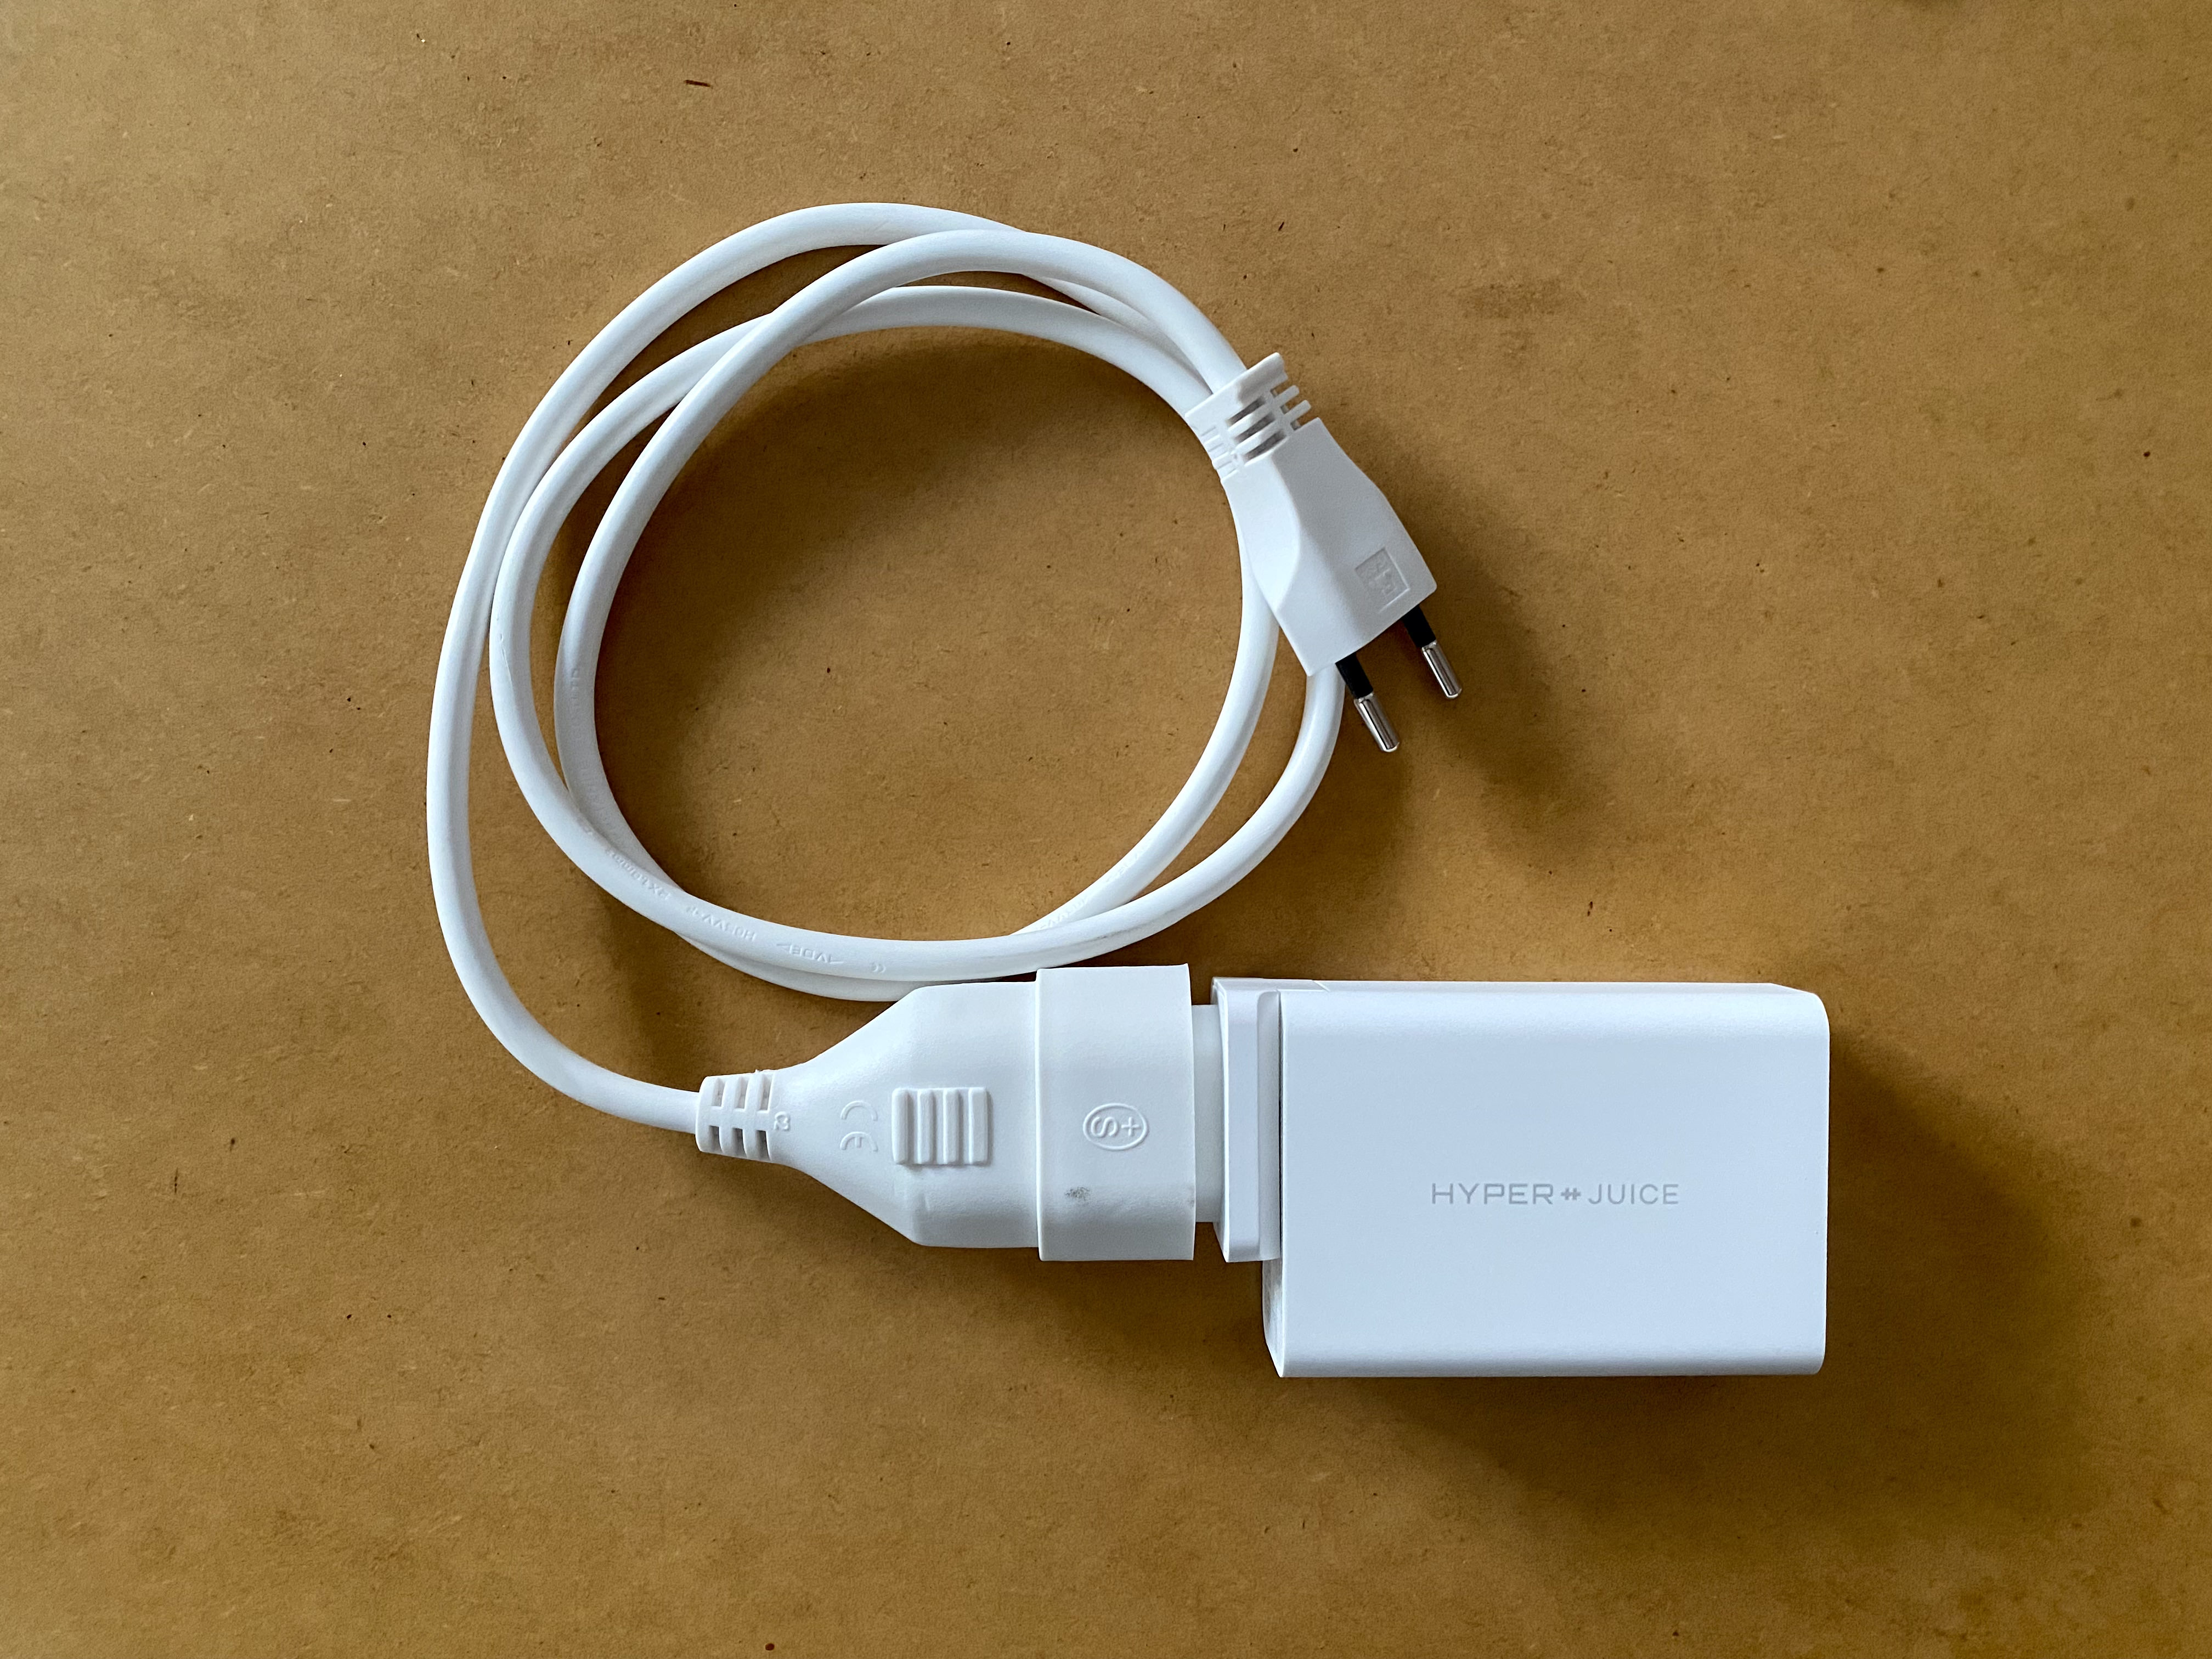 HyperJuice charger with extension cord. The cord dwarfs the charger…